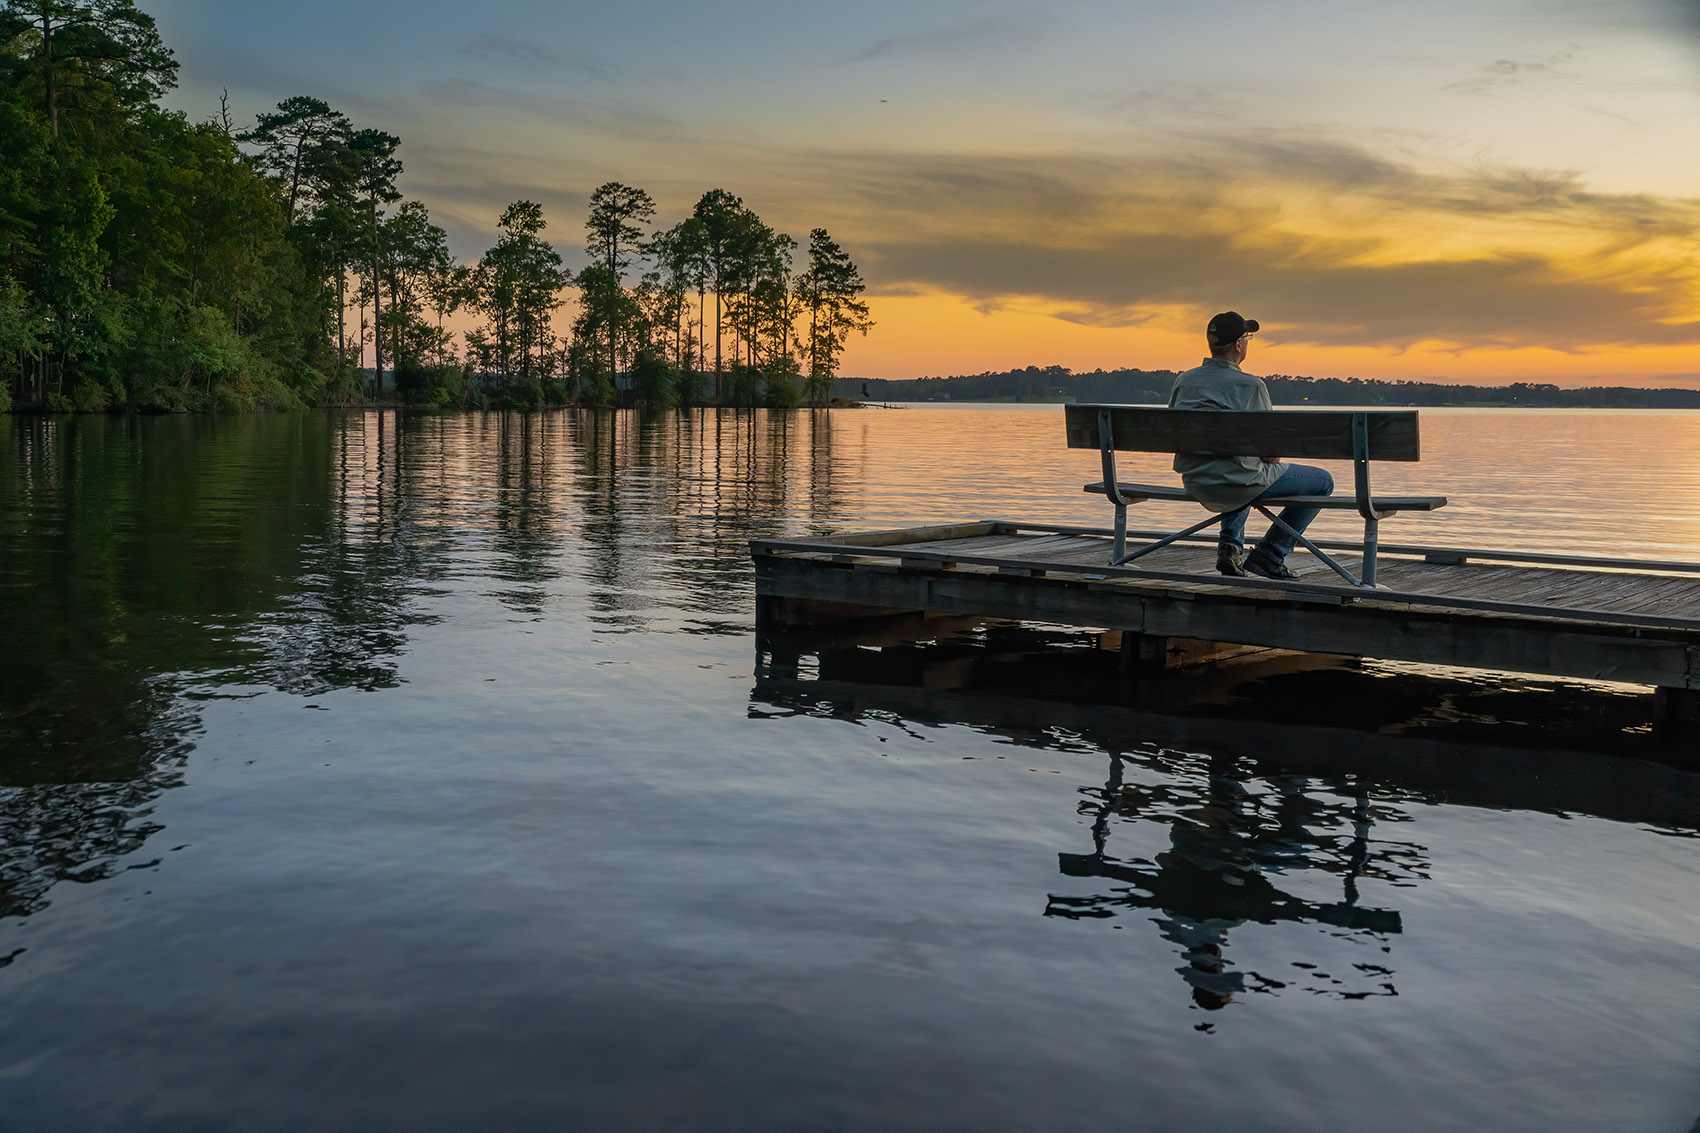 sunset at Louisiana State Park with calm lake orange sky and silhouette of man setting on bench